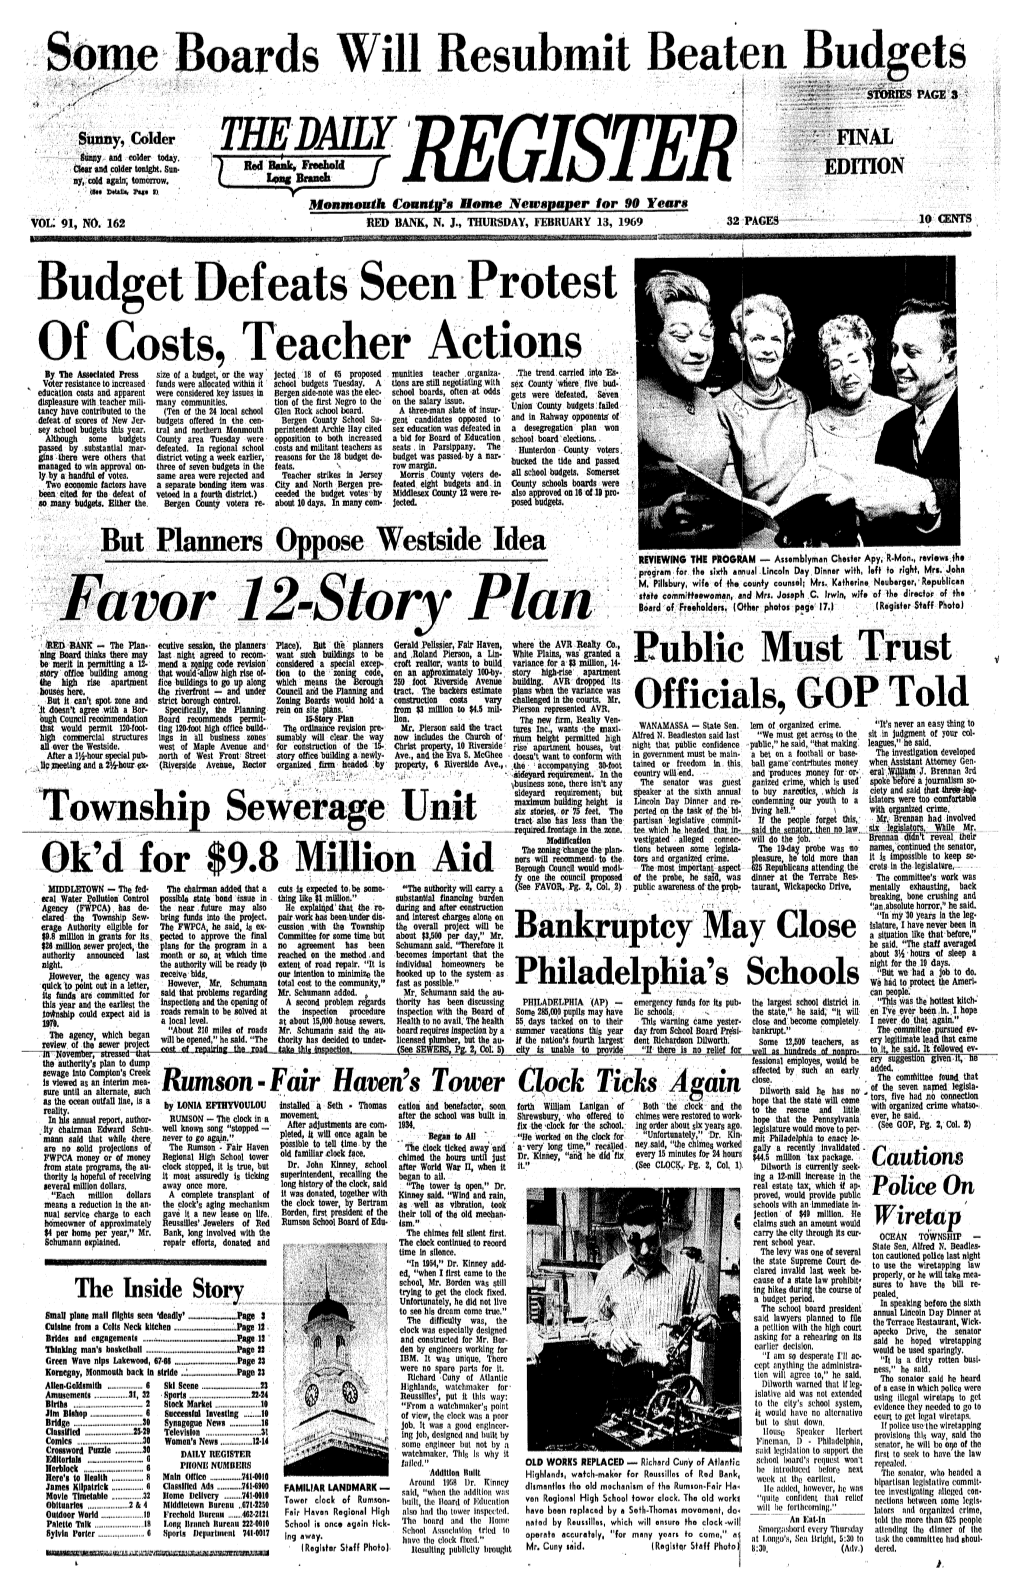 13, 1969 32 PAGES 10 CENTS Budget Defeats Seen Protest of Costs, Teacher by the Associated Press Size of a Budget, Or the Way Jected